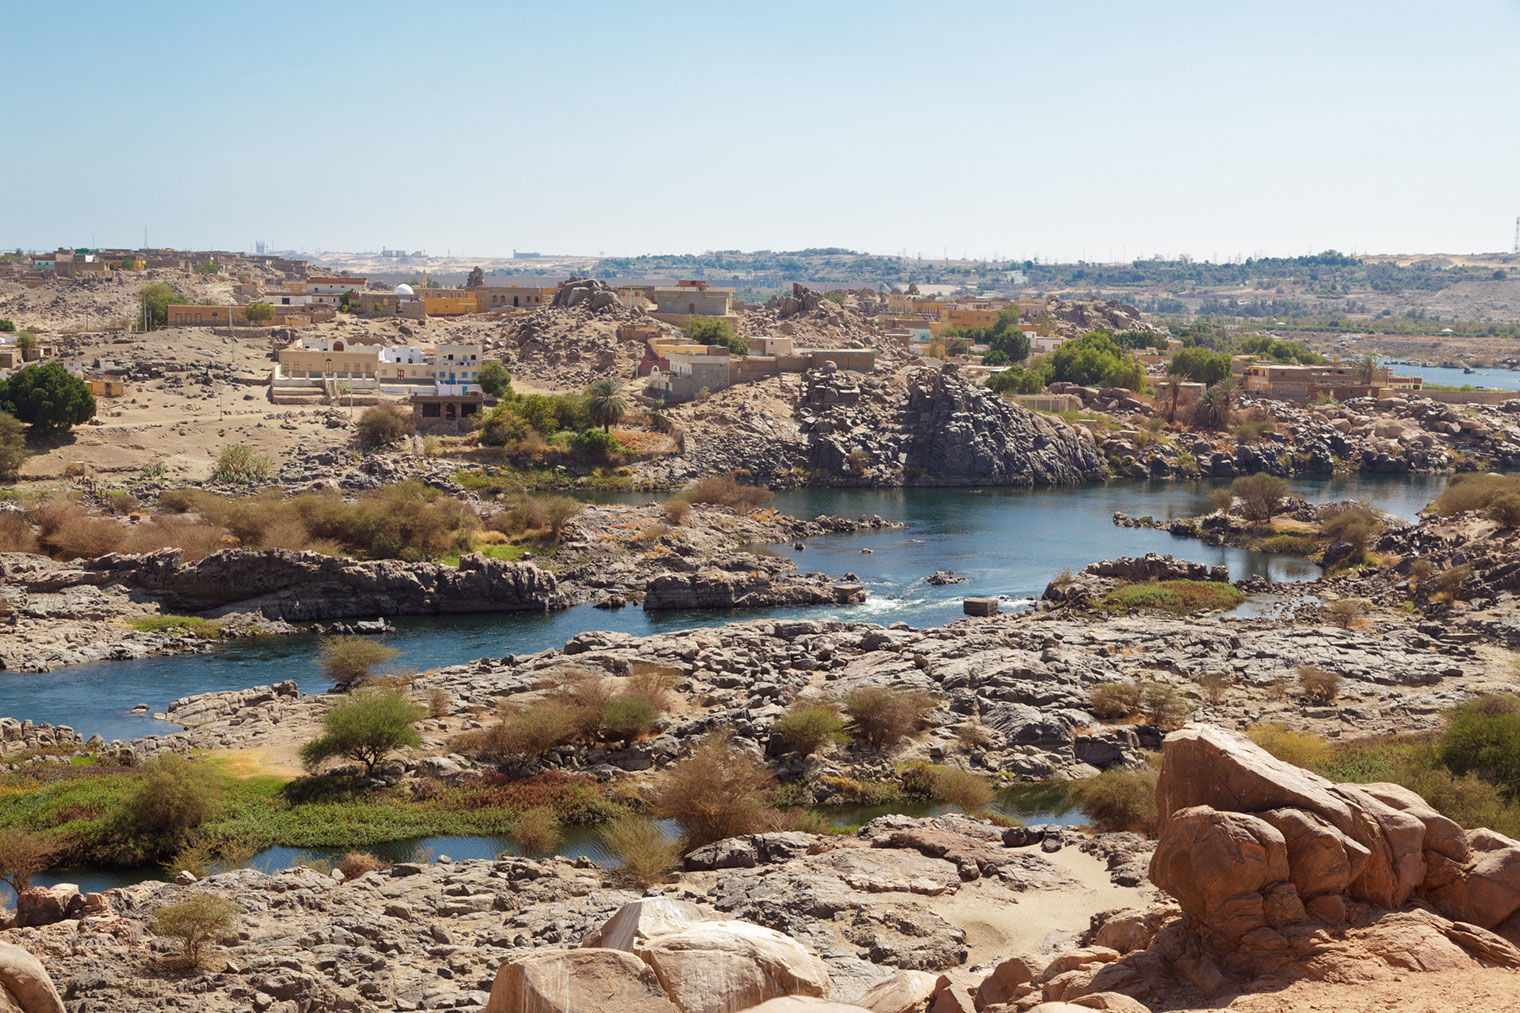 An image showing a few buildings along a shallow river in the desert. The river is the First Cataract at Aswan in Lower Nubia (modern Egypt). 